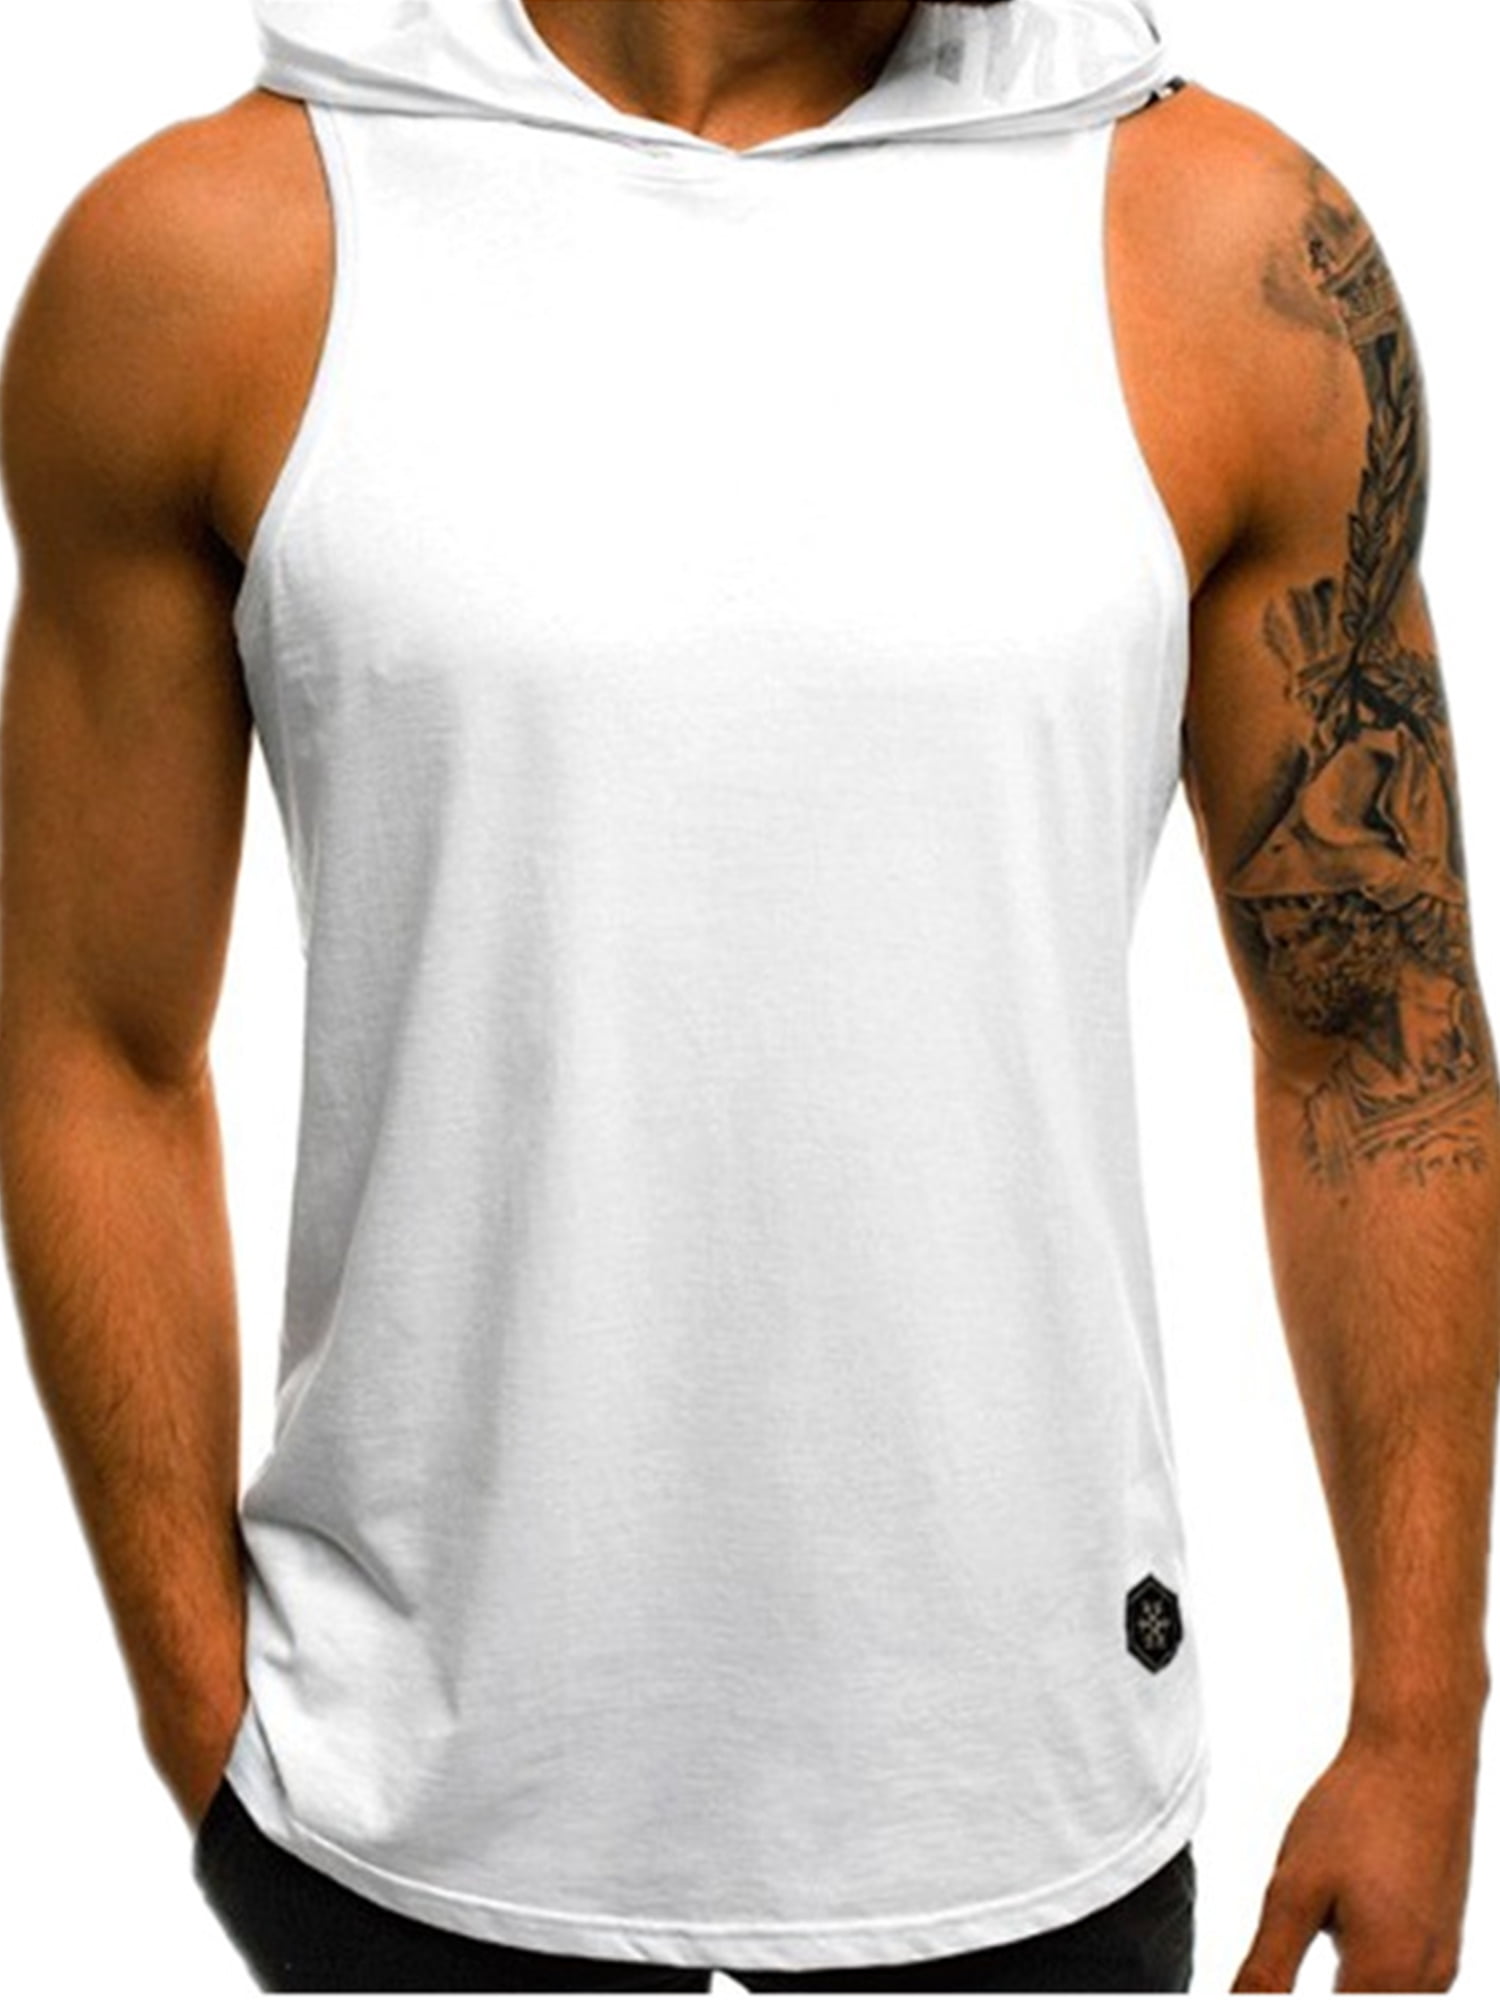 Oopp Jfhg Vest Sleeveless Shirts Fit Mens Always Be Yourself Moose Sand Muscle 